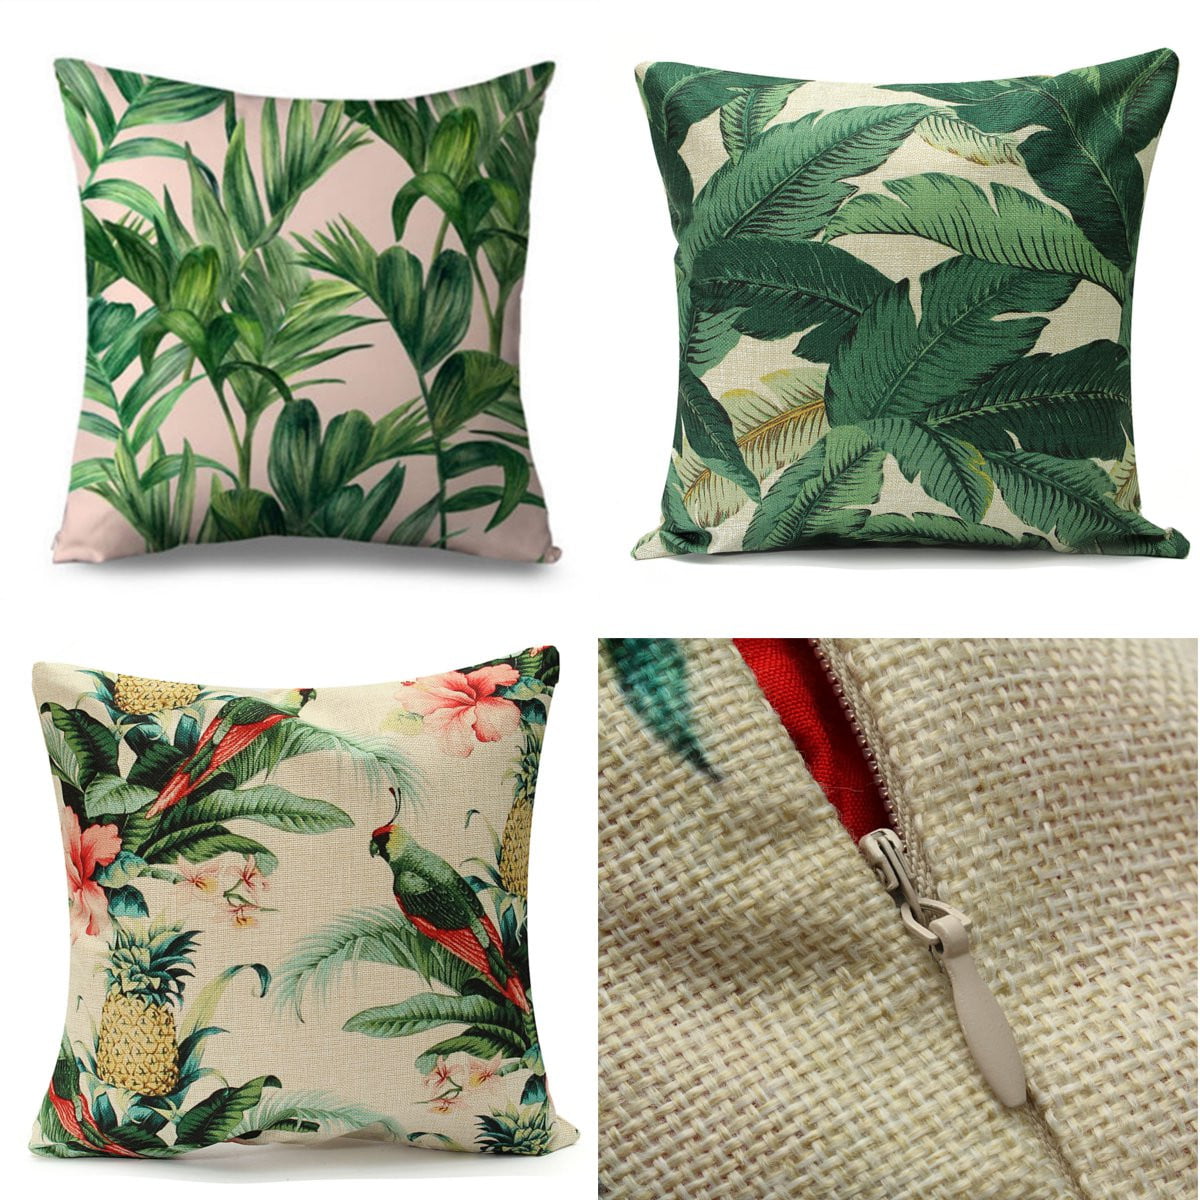 Tropical Linen Pillow Case Green Plant Pattern Outdoor Cushion Cover Home Decor 